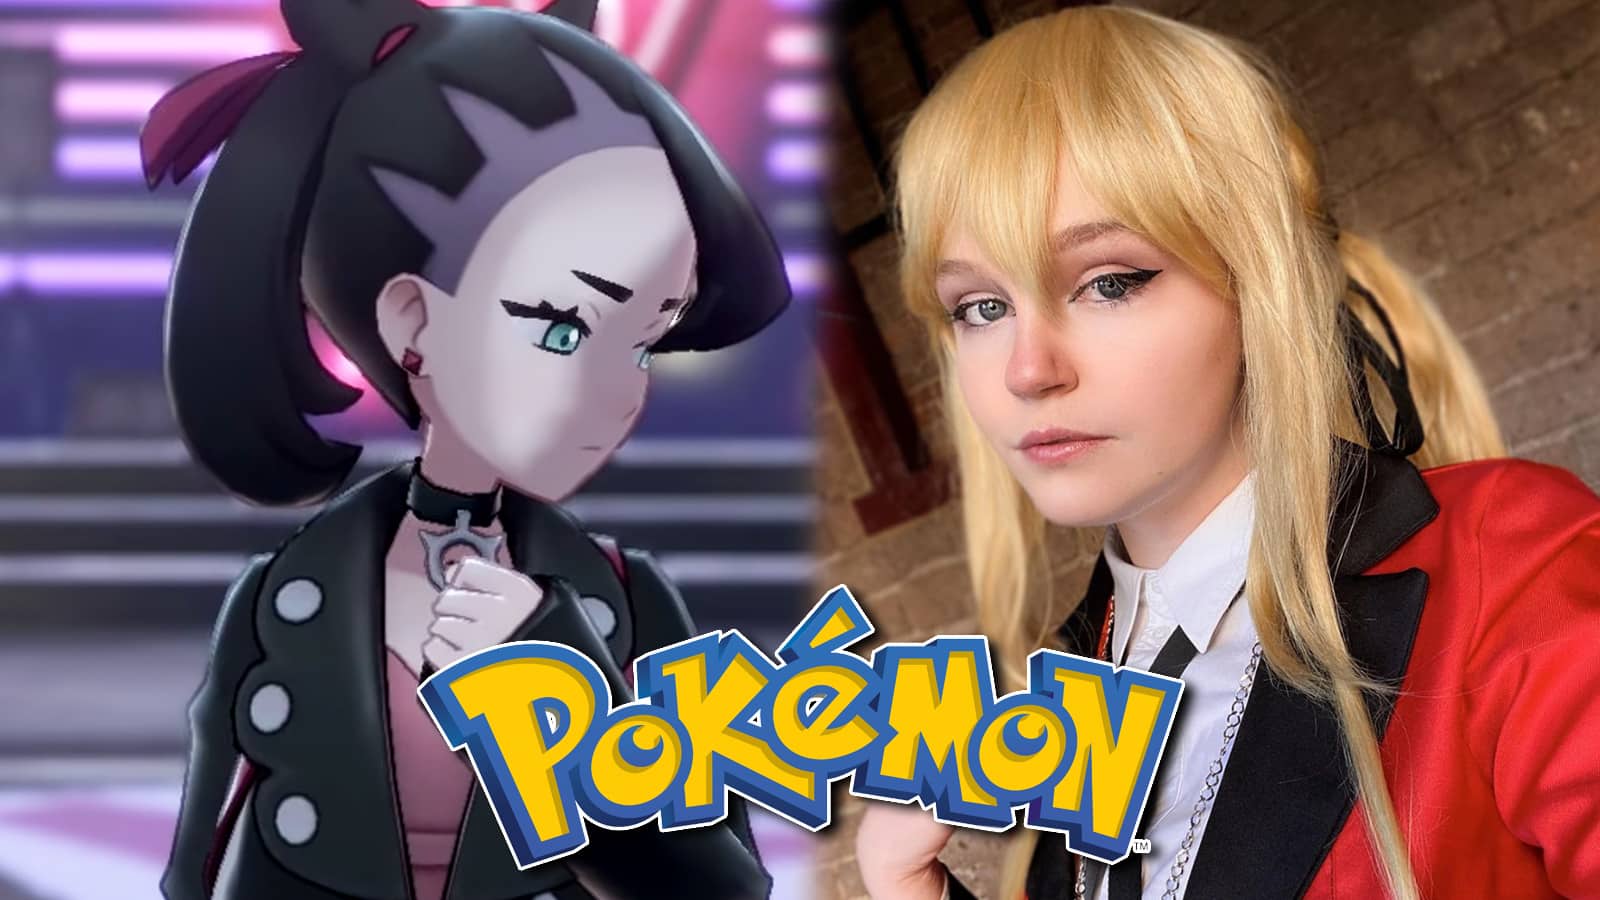 Marnie from Pokemon Sword & Shield next to cosplayer